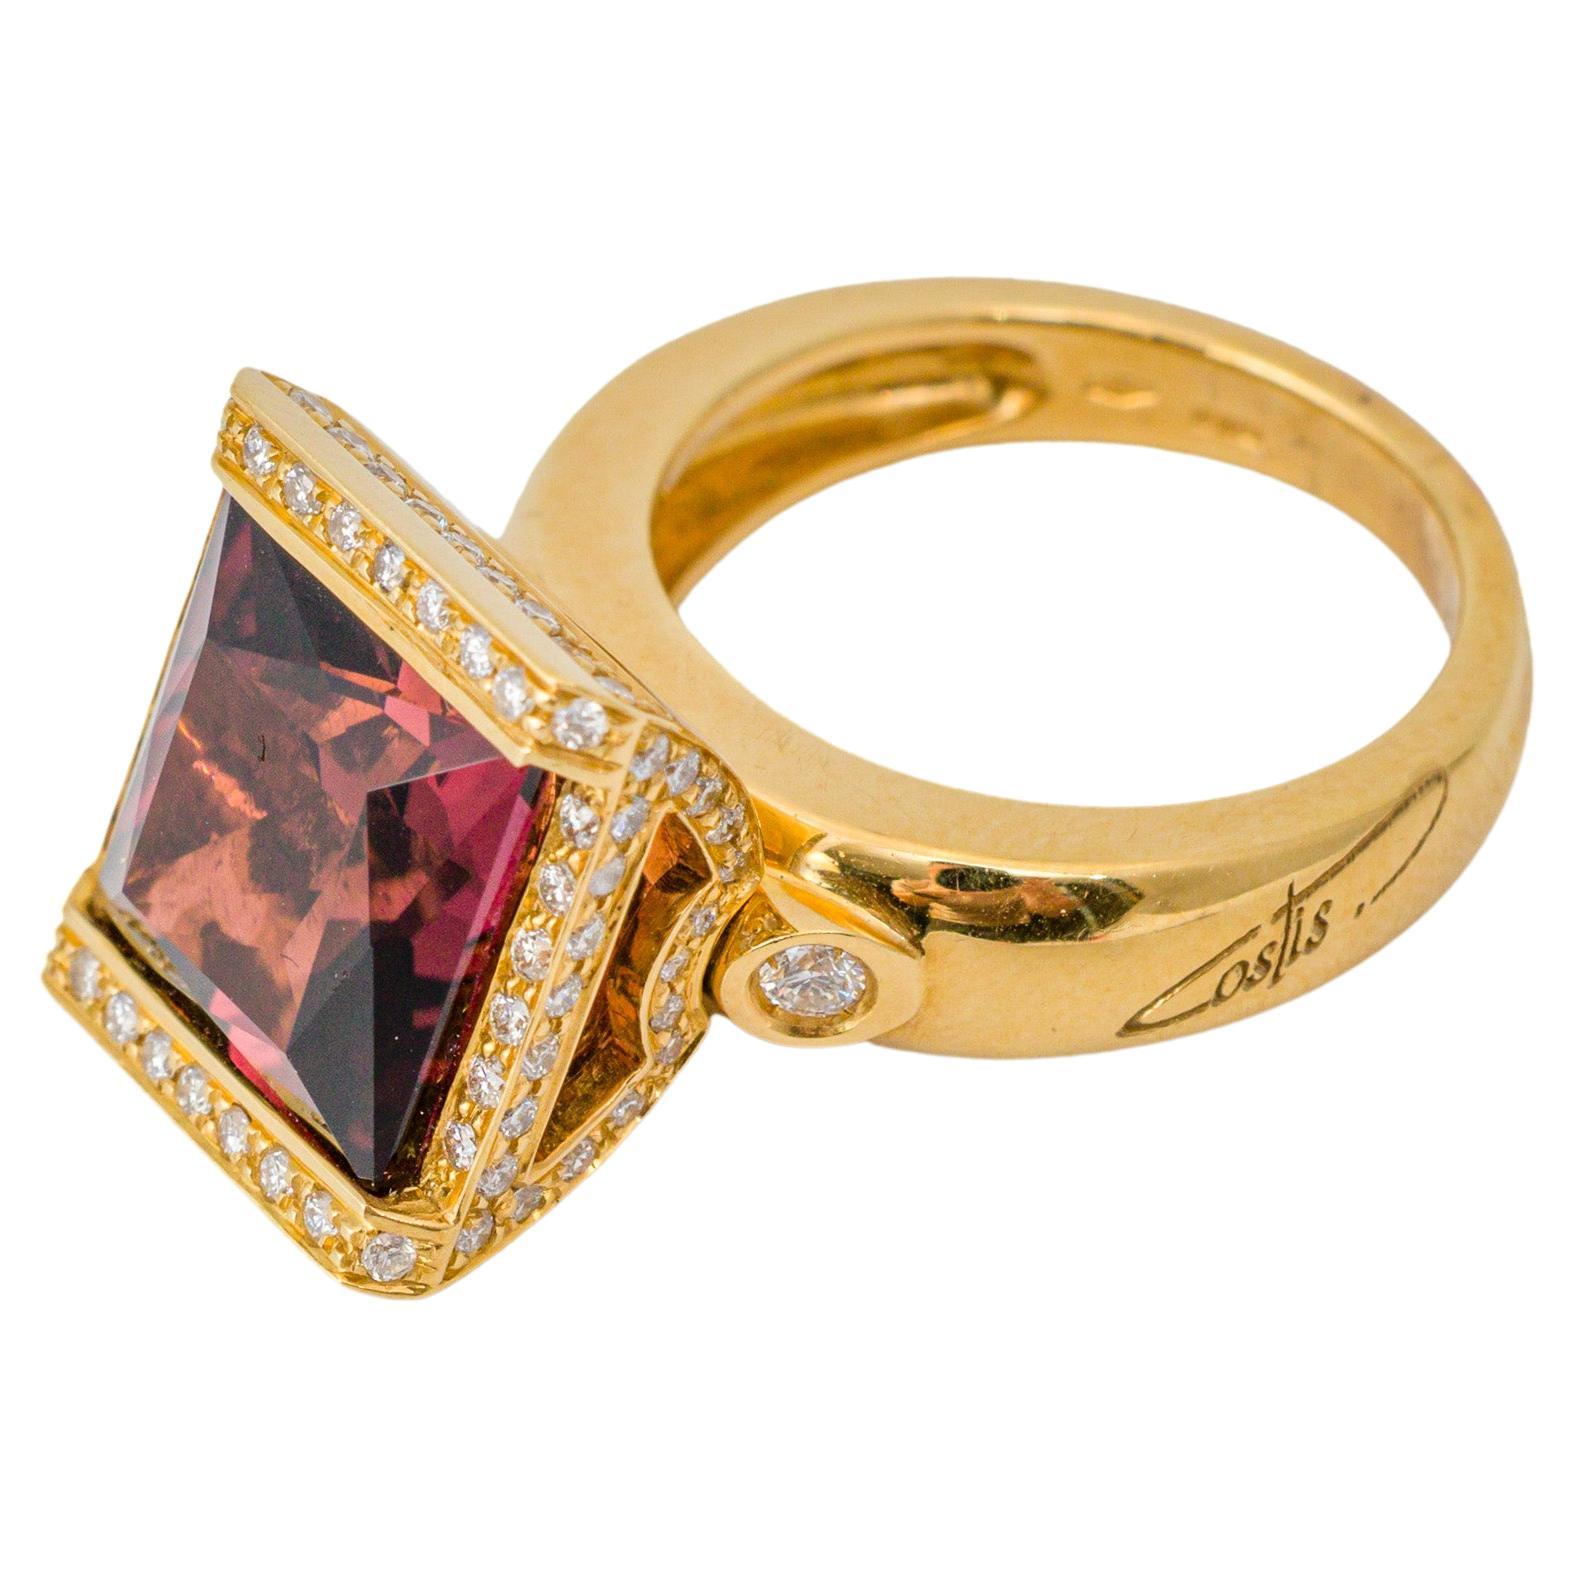 "Costis" Square In Motion Ring with 8.36 carats Pink Tourmaline and Diamonds For Sale